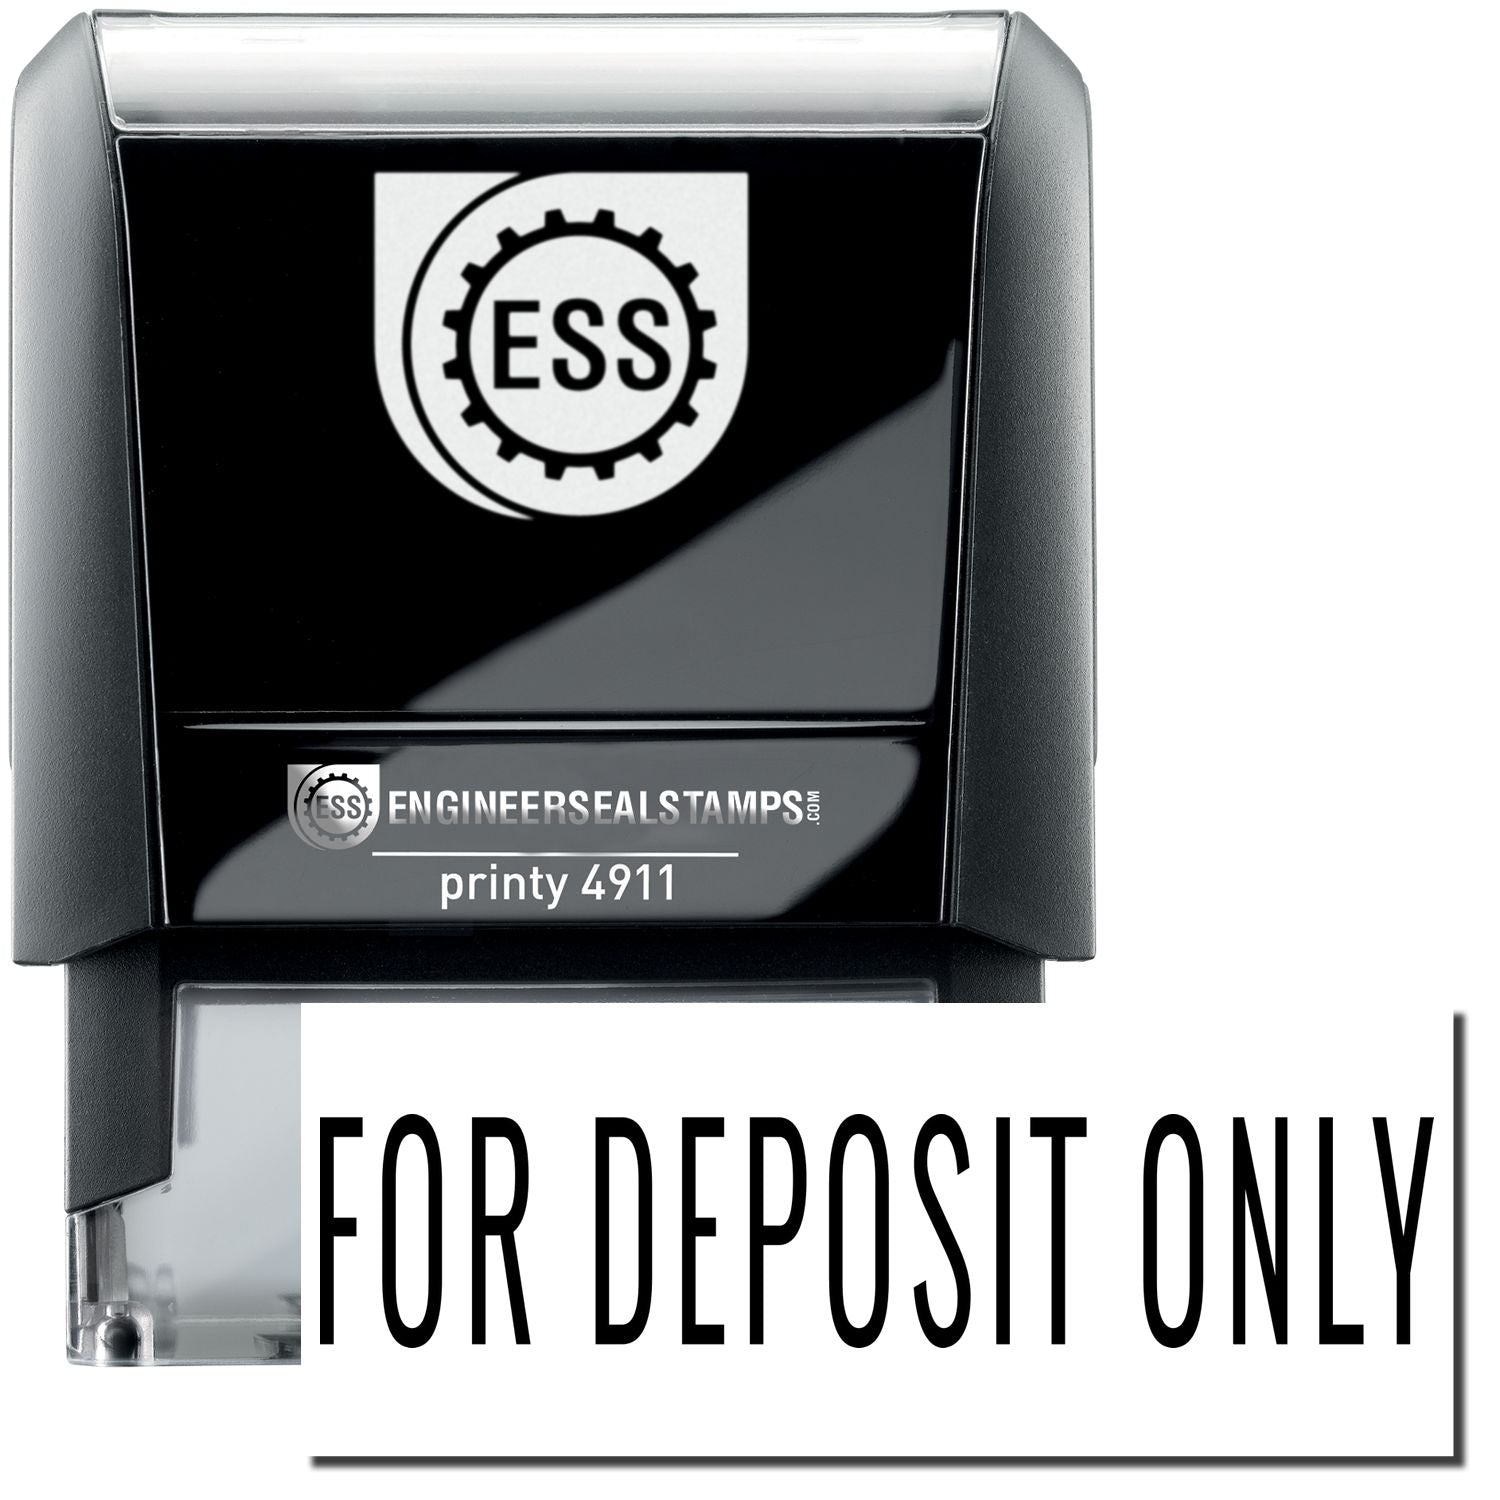 A self-inking stamp with a stamped image showing how the text "FOR DEPOSIT ONLY" in a narrow font is displayed after stamping.